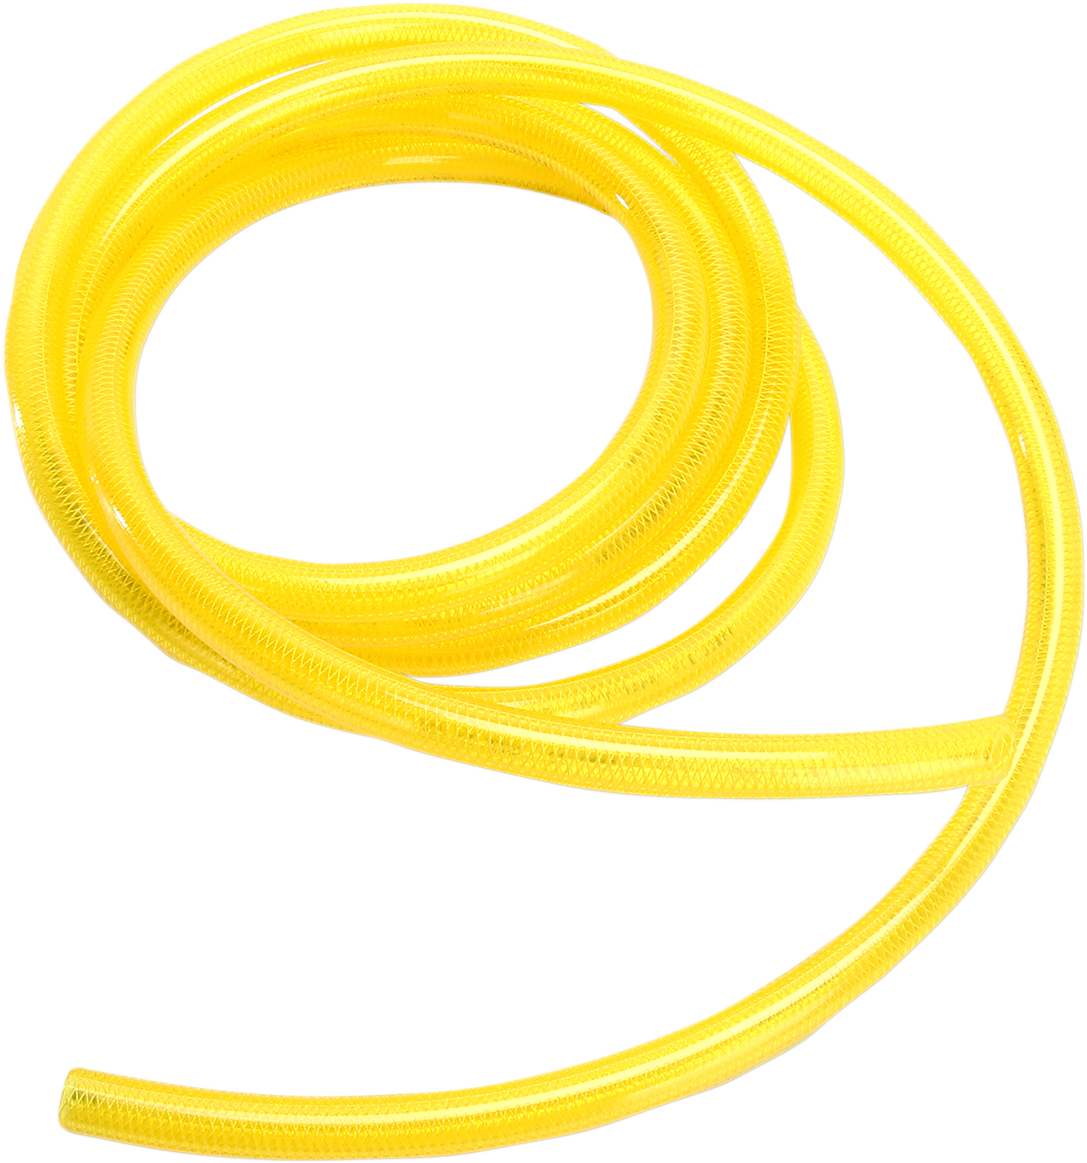 0706-0288 - HELIX High-Pressure Fuel Line - Yellow - 3/8" - 10' 380-0304